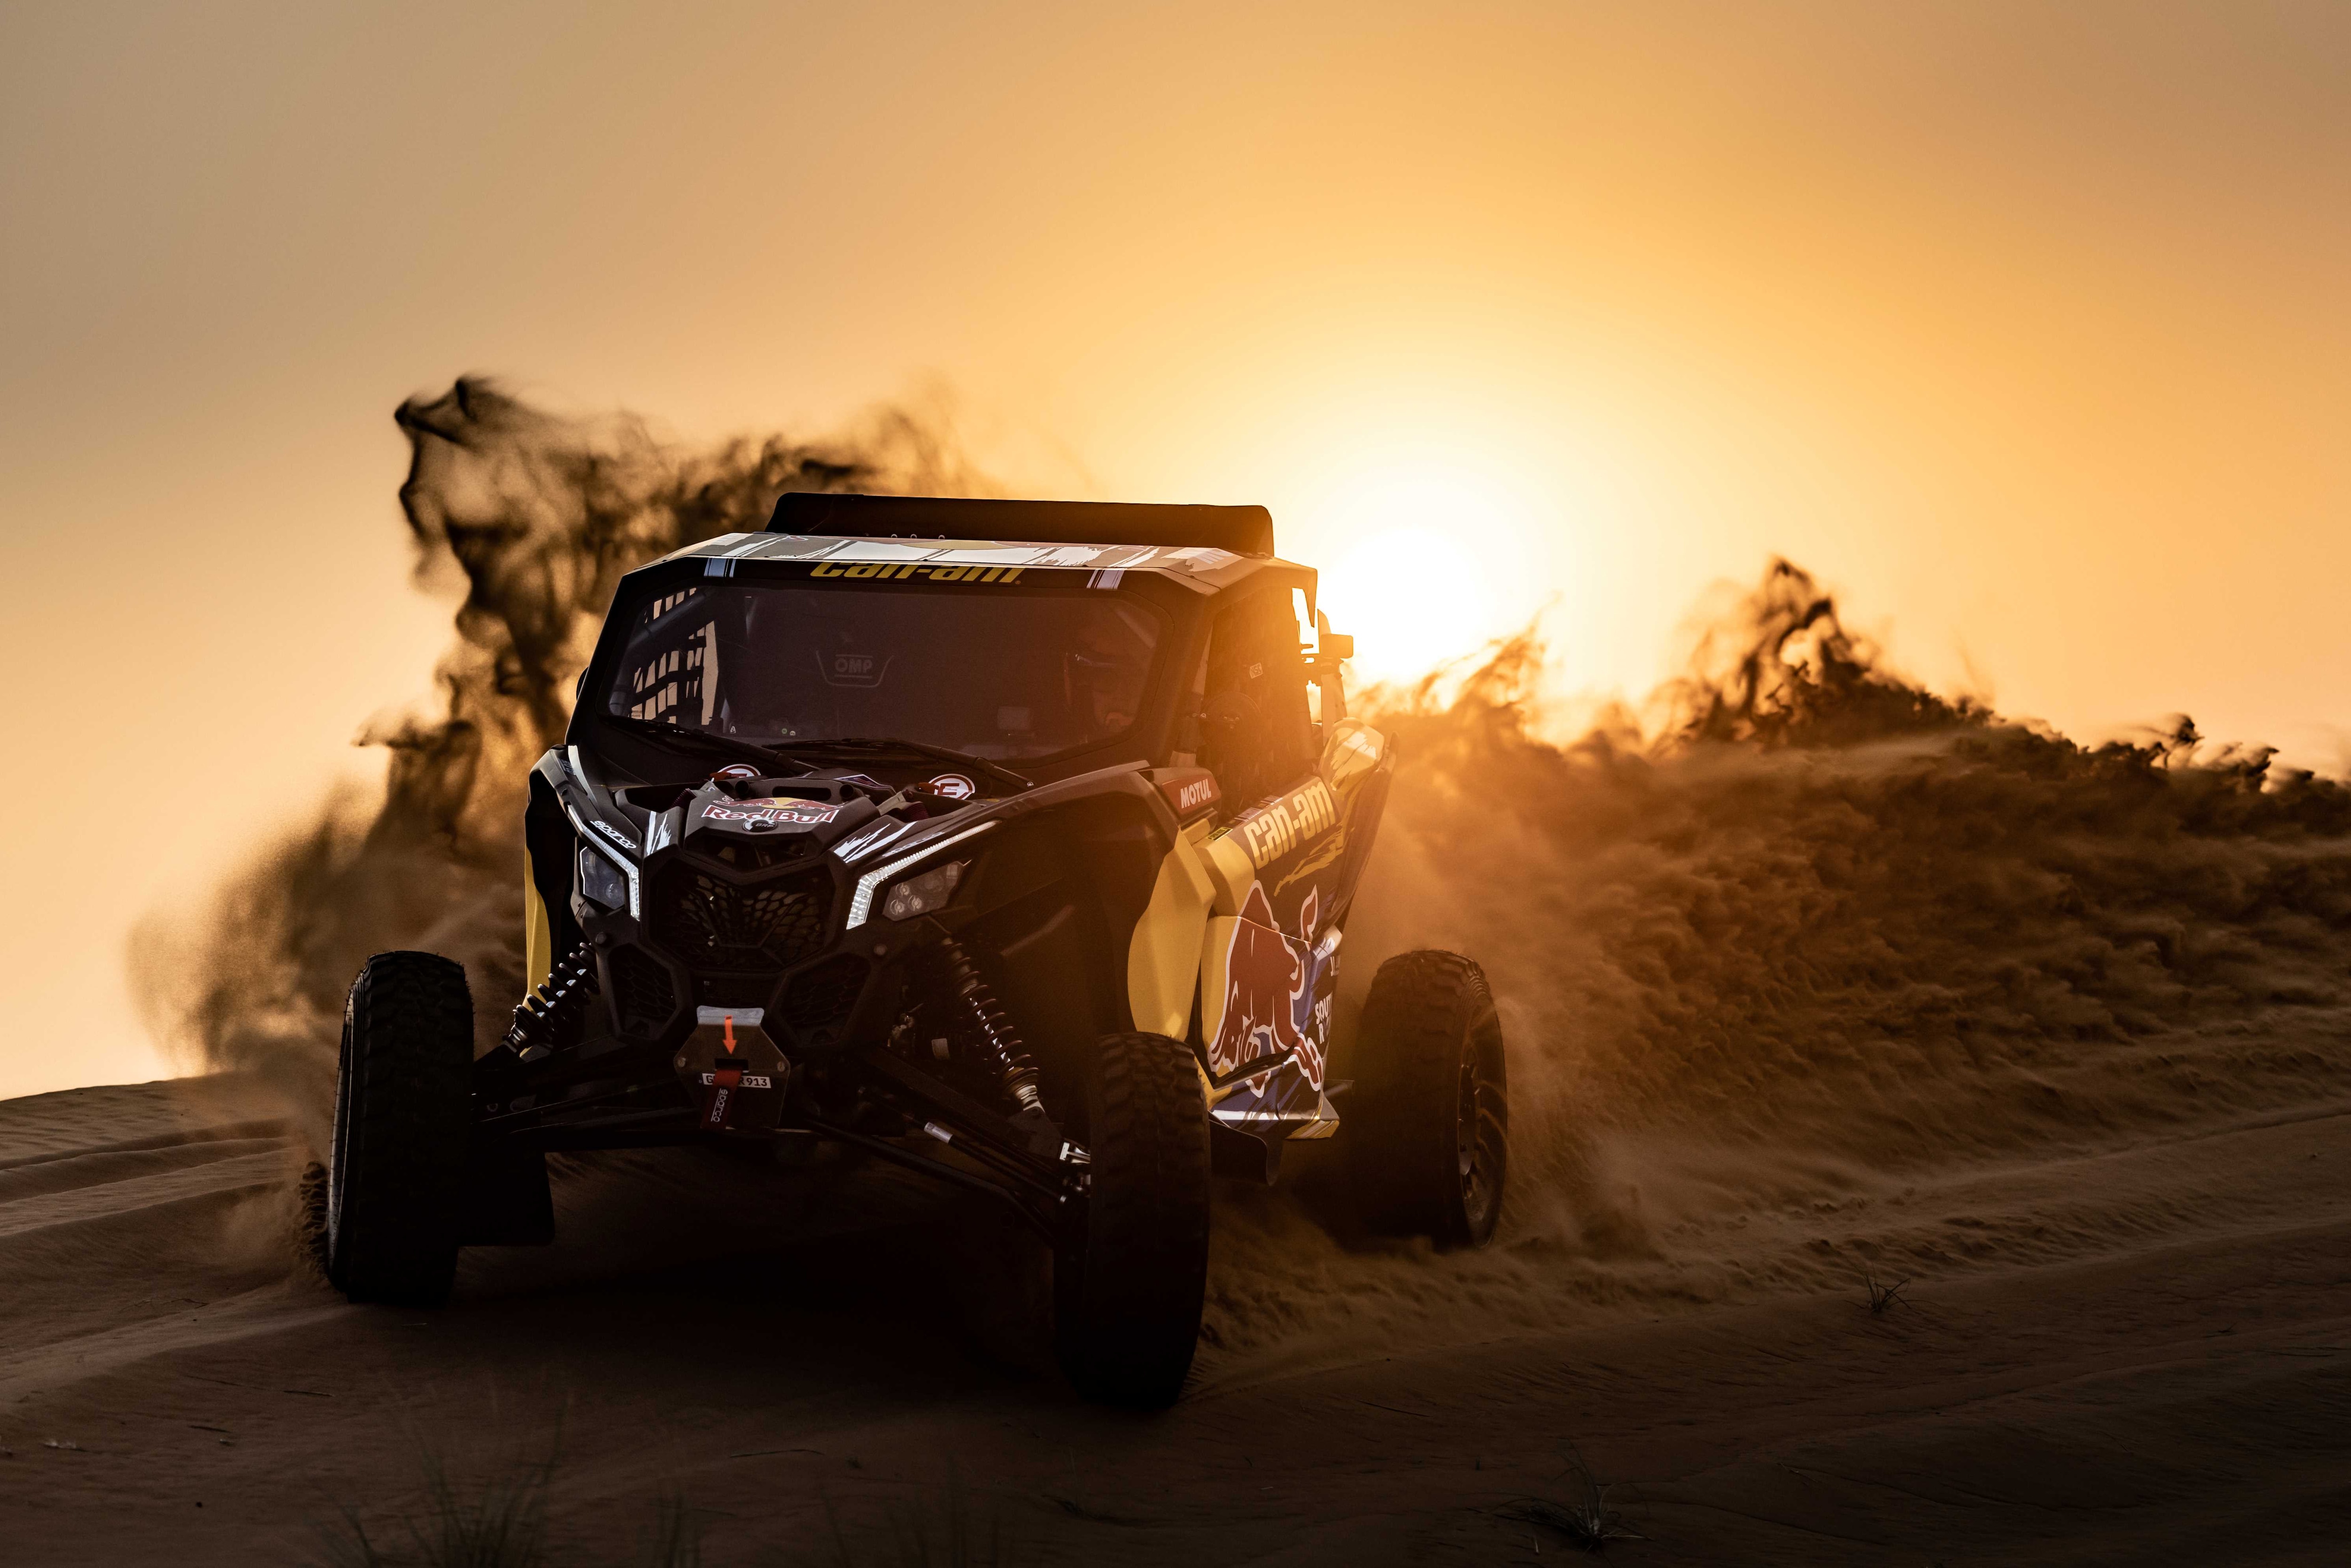 Breathtaking view of a maverick X3 in the desert